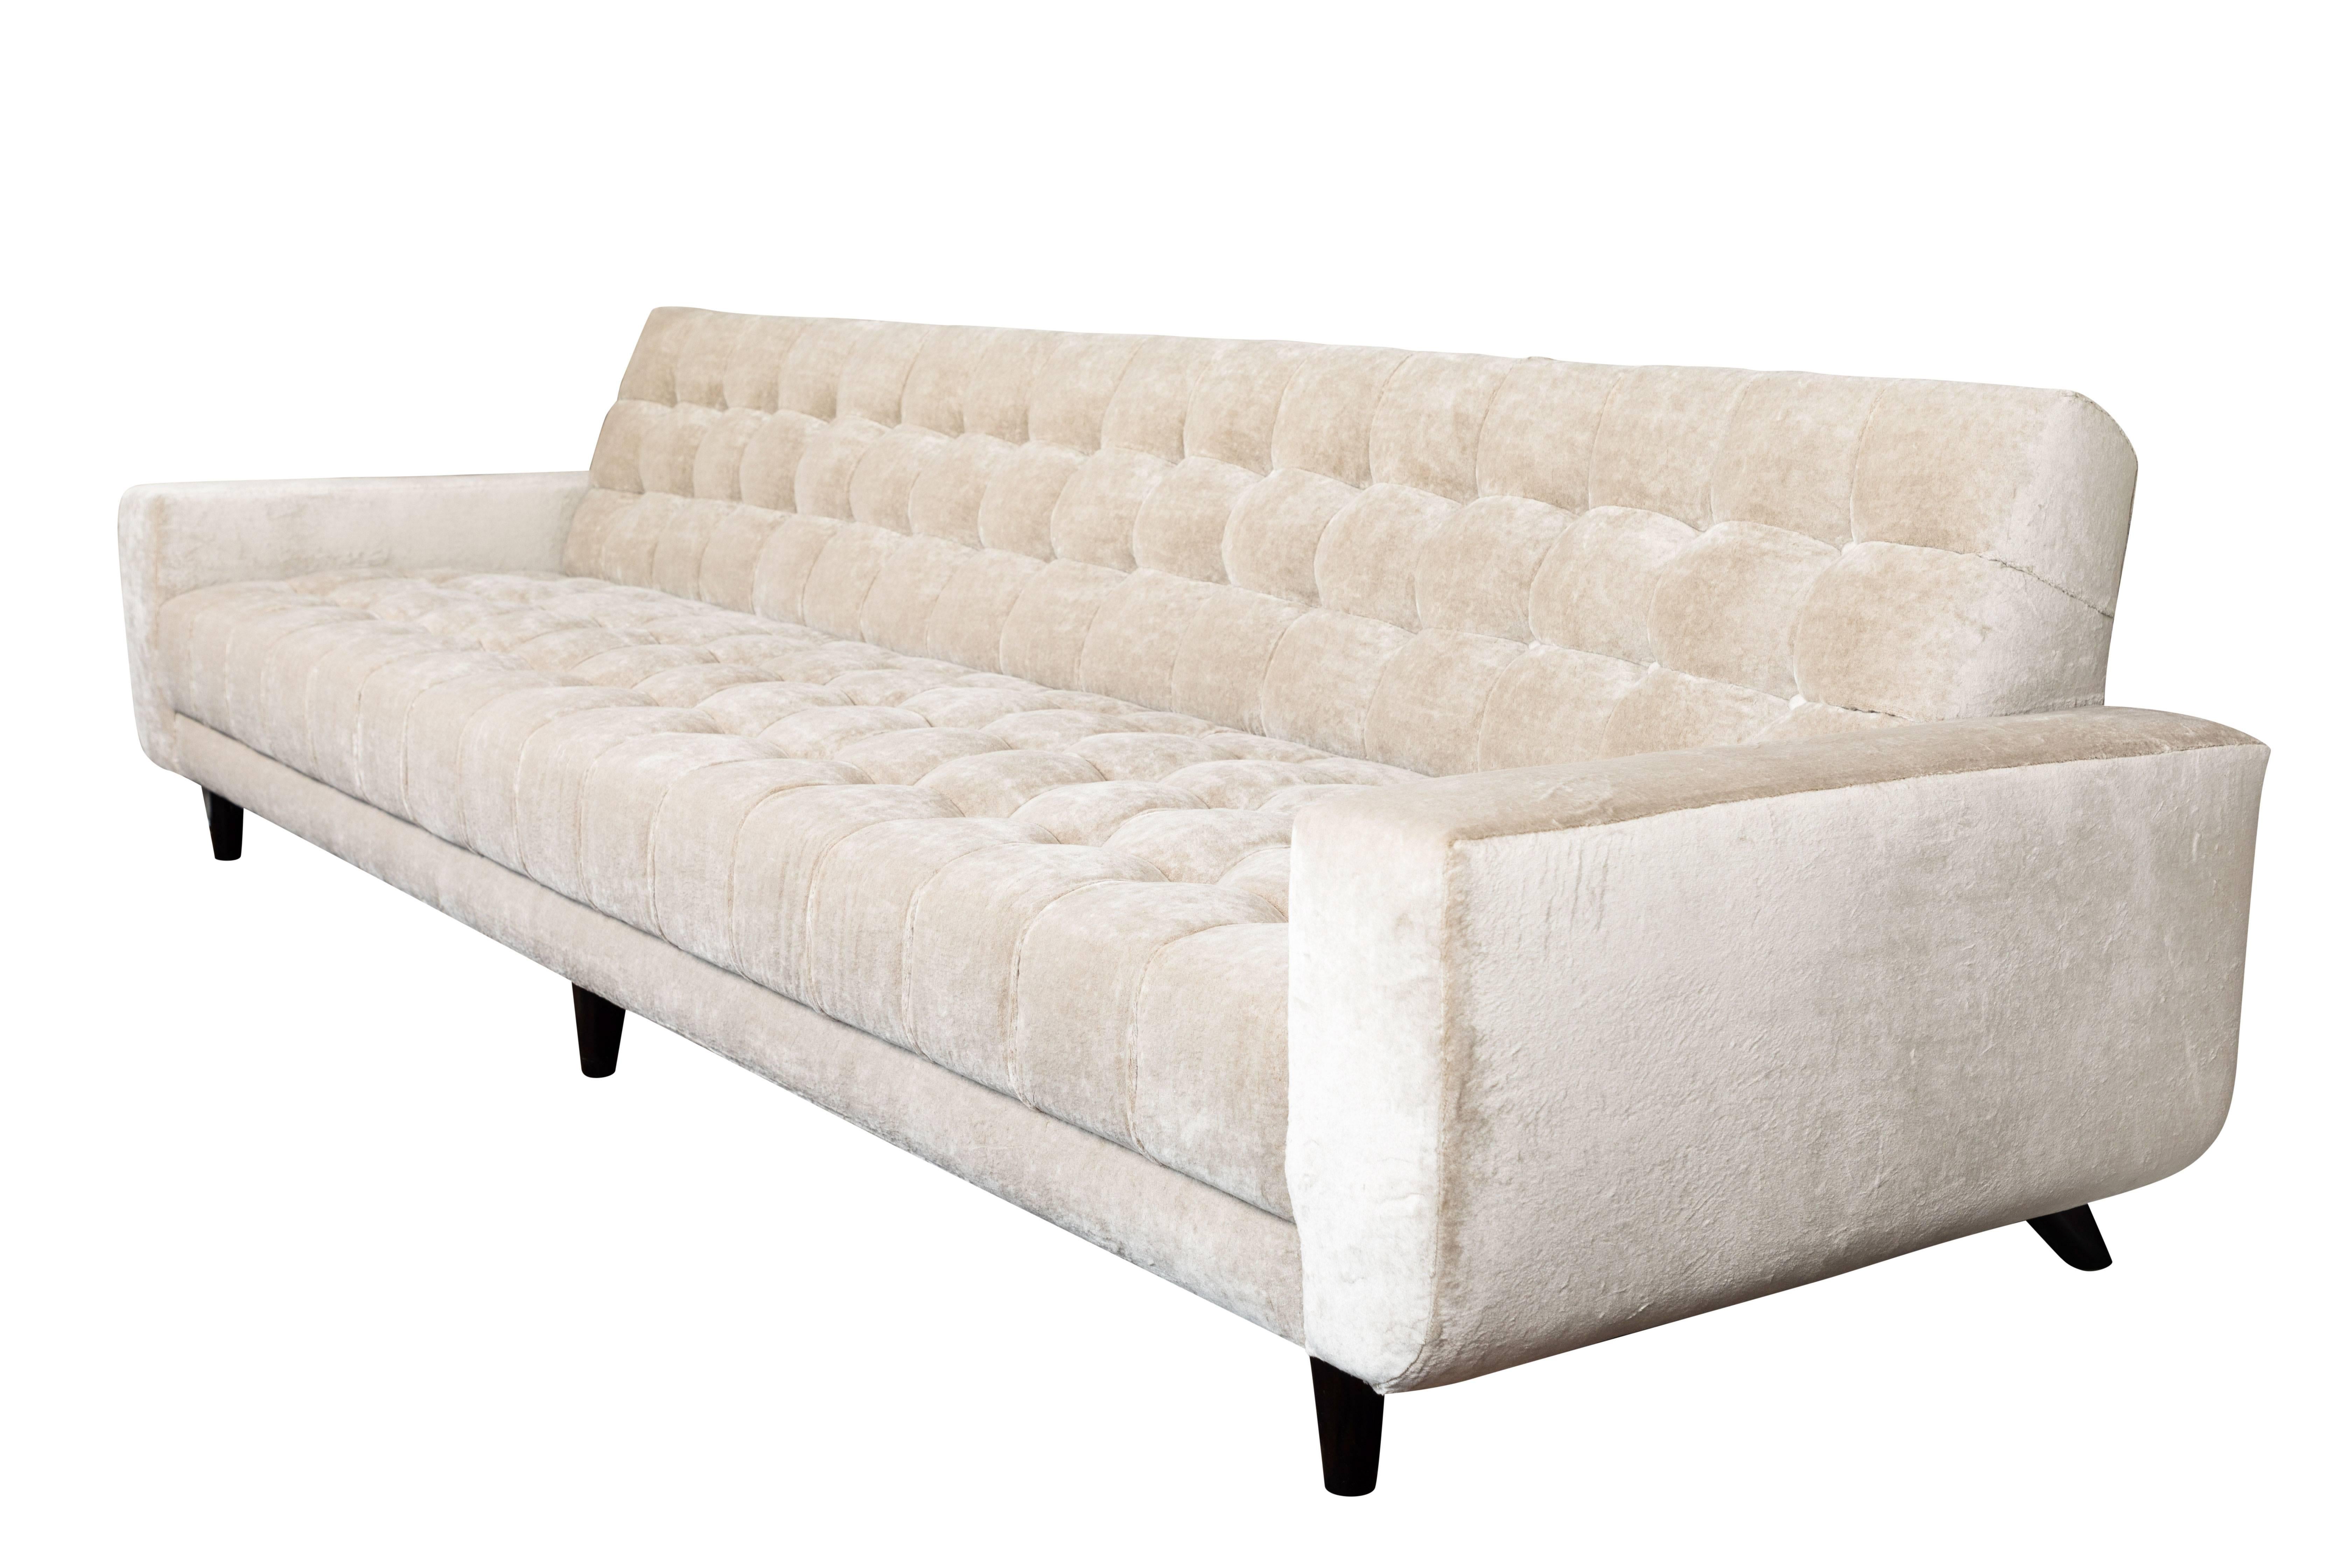 Mid-20th Century Beautiful Biscuit Tufted Ledge Back Sofa by William Haines